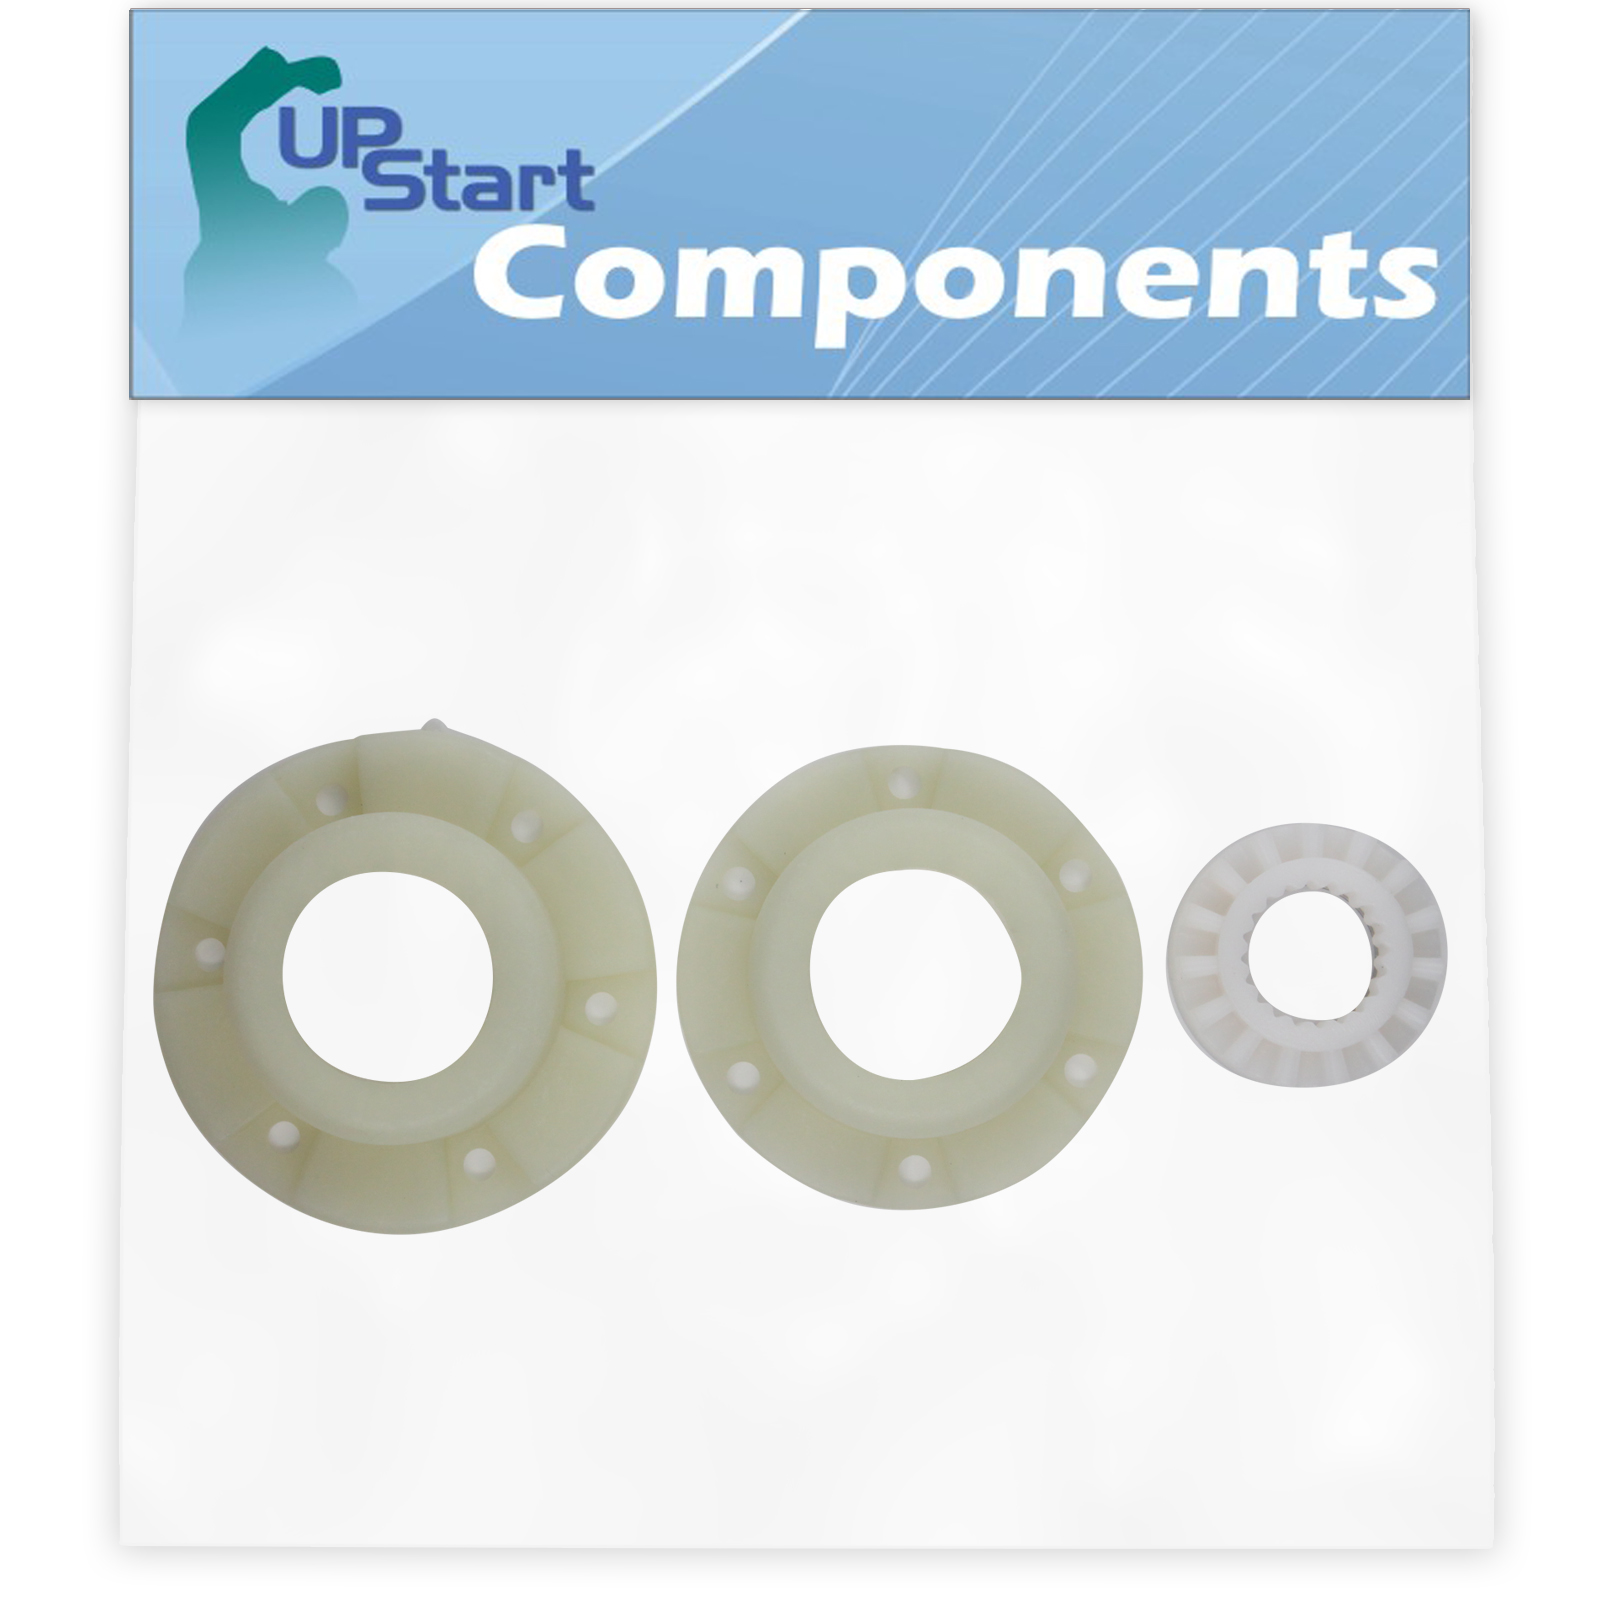 W10820039 Hub Kit Replacement for Kenmore / Sears 11028042700 Washer - Compatible with 280145 Basket Hub Kit - UpStart Components Brand - image 1 of 4